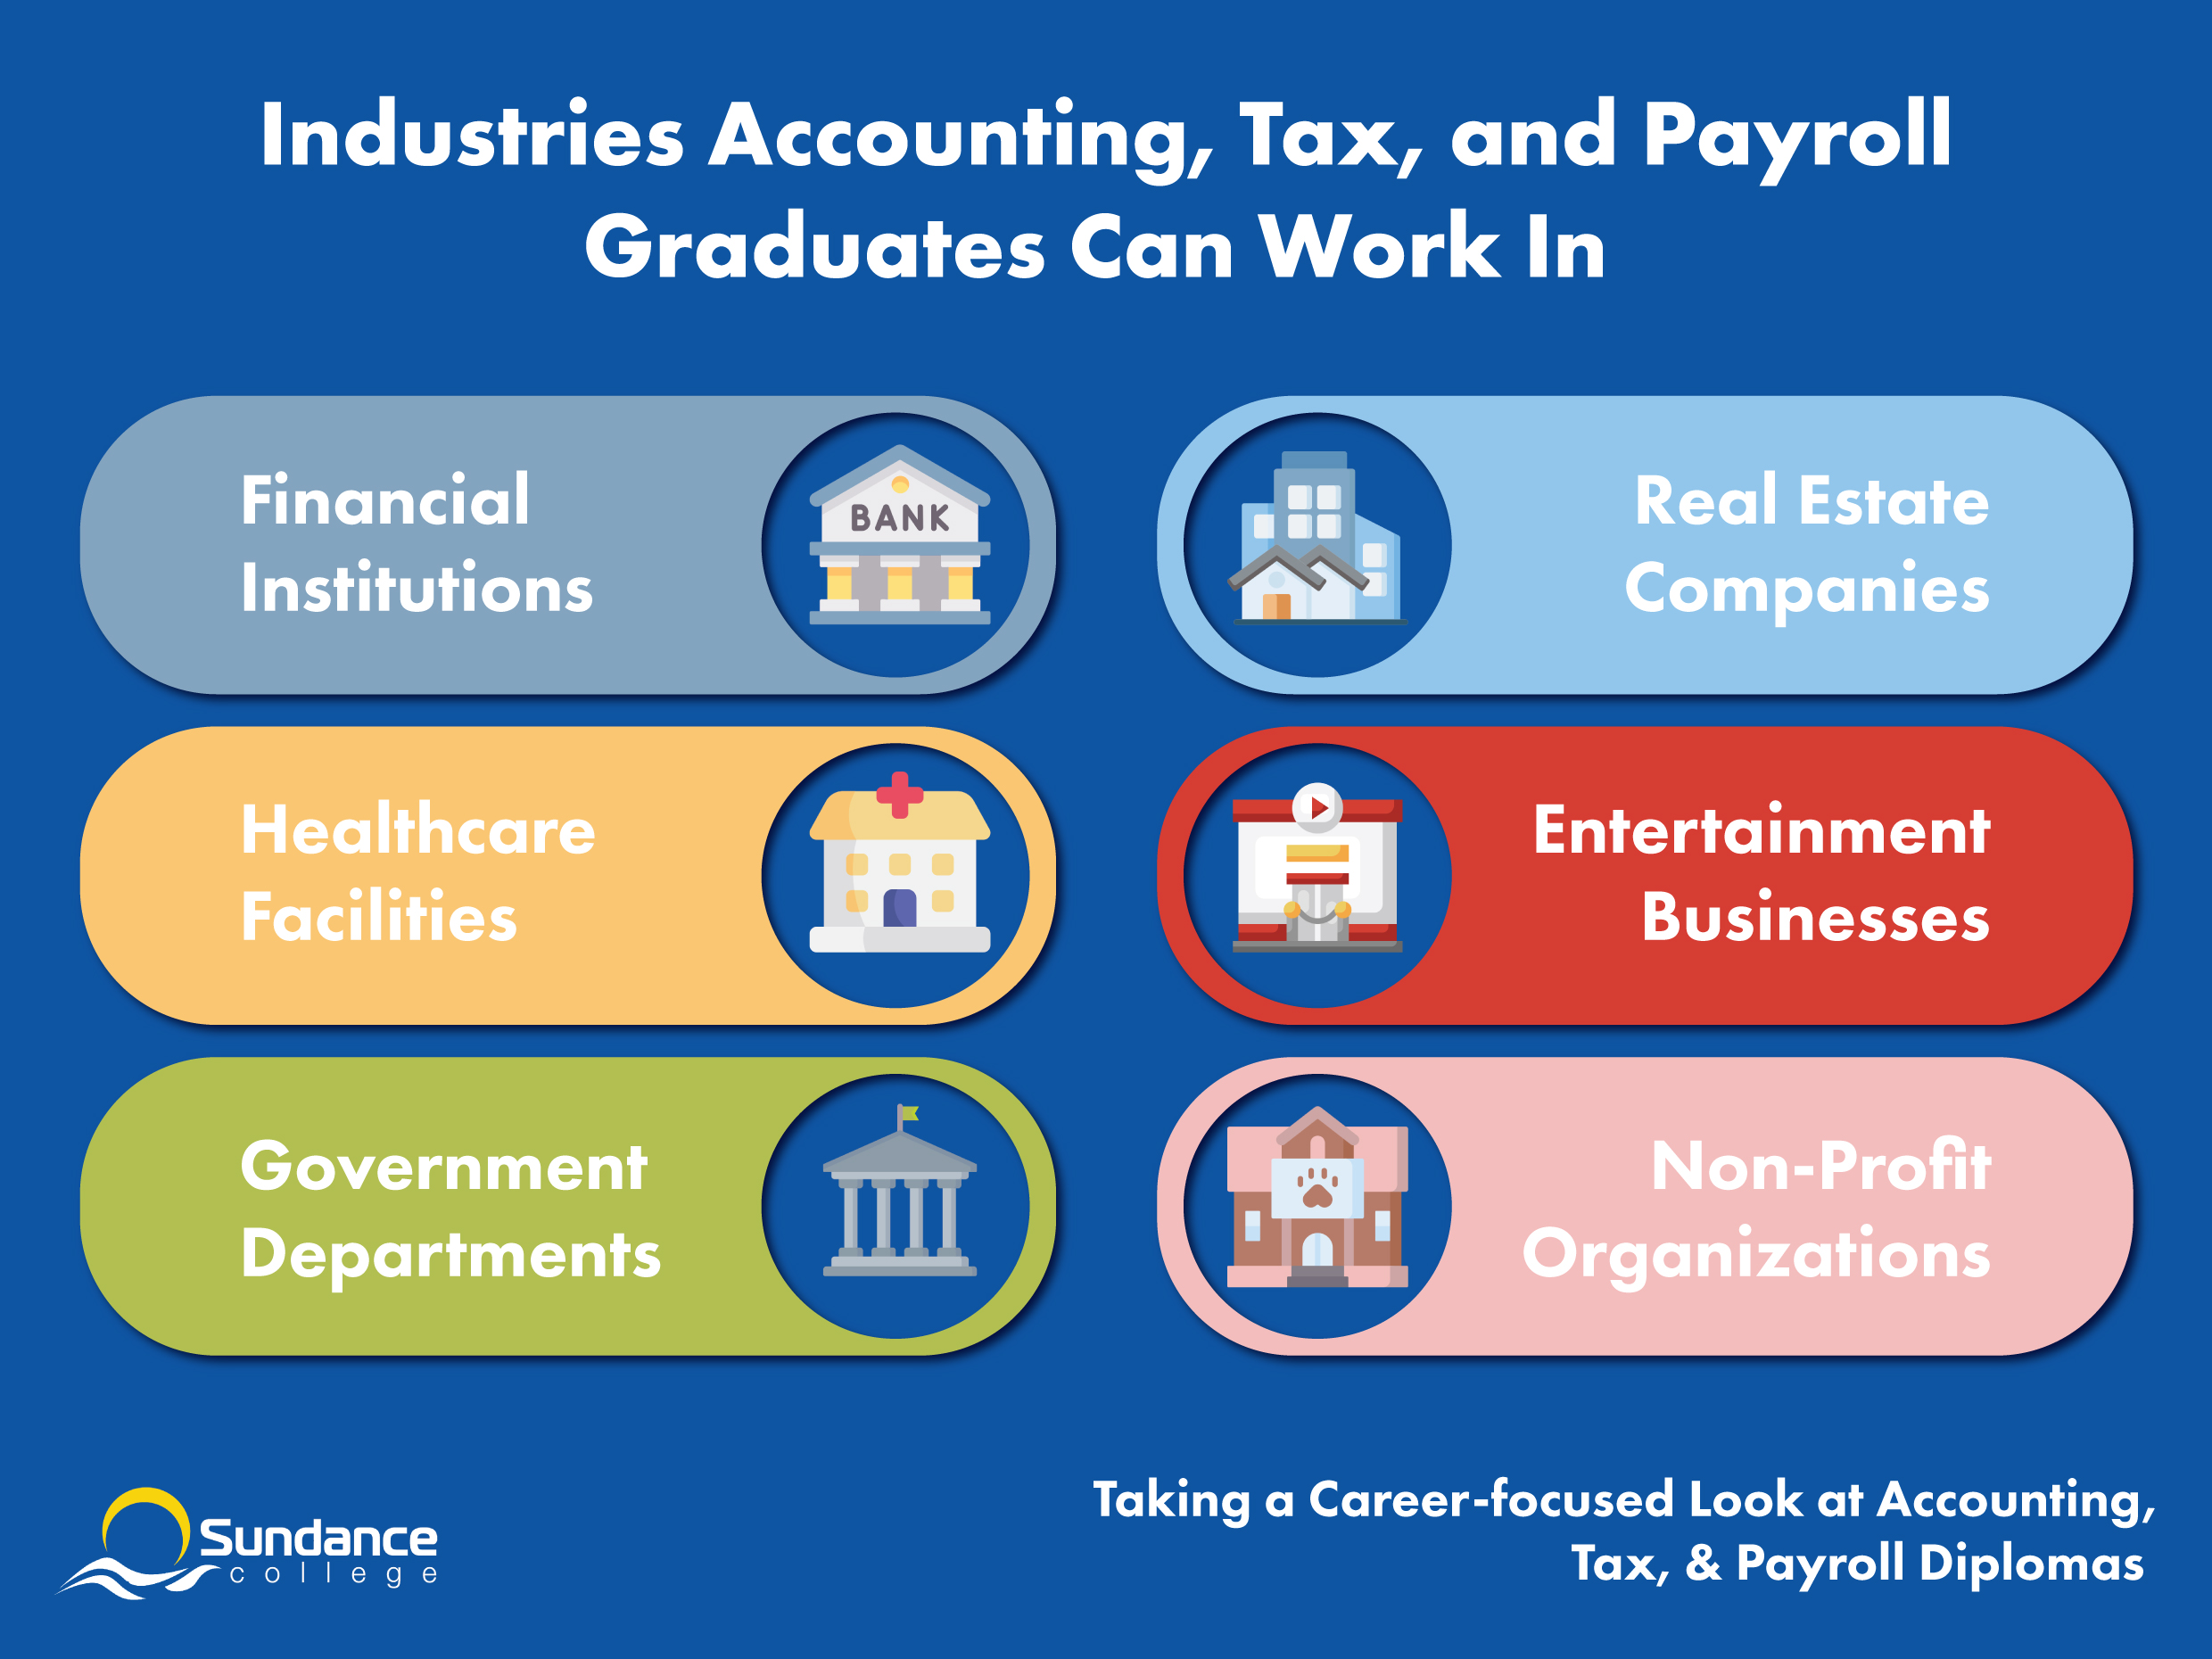 Industries Accounting, Tax & Payroll Graduates Can Work In